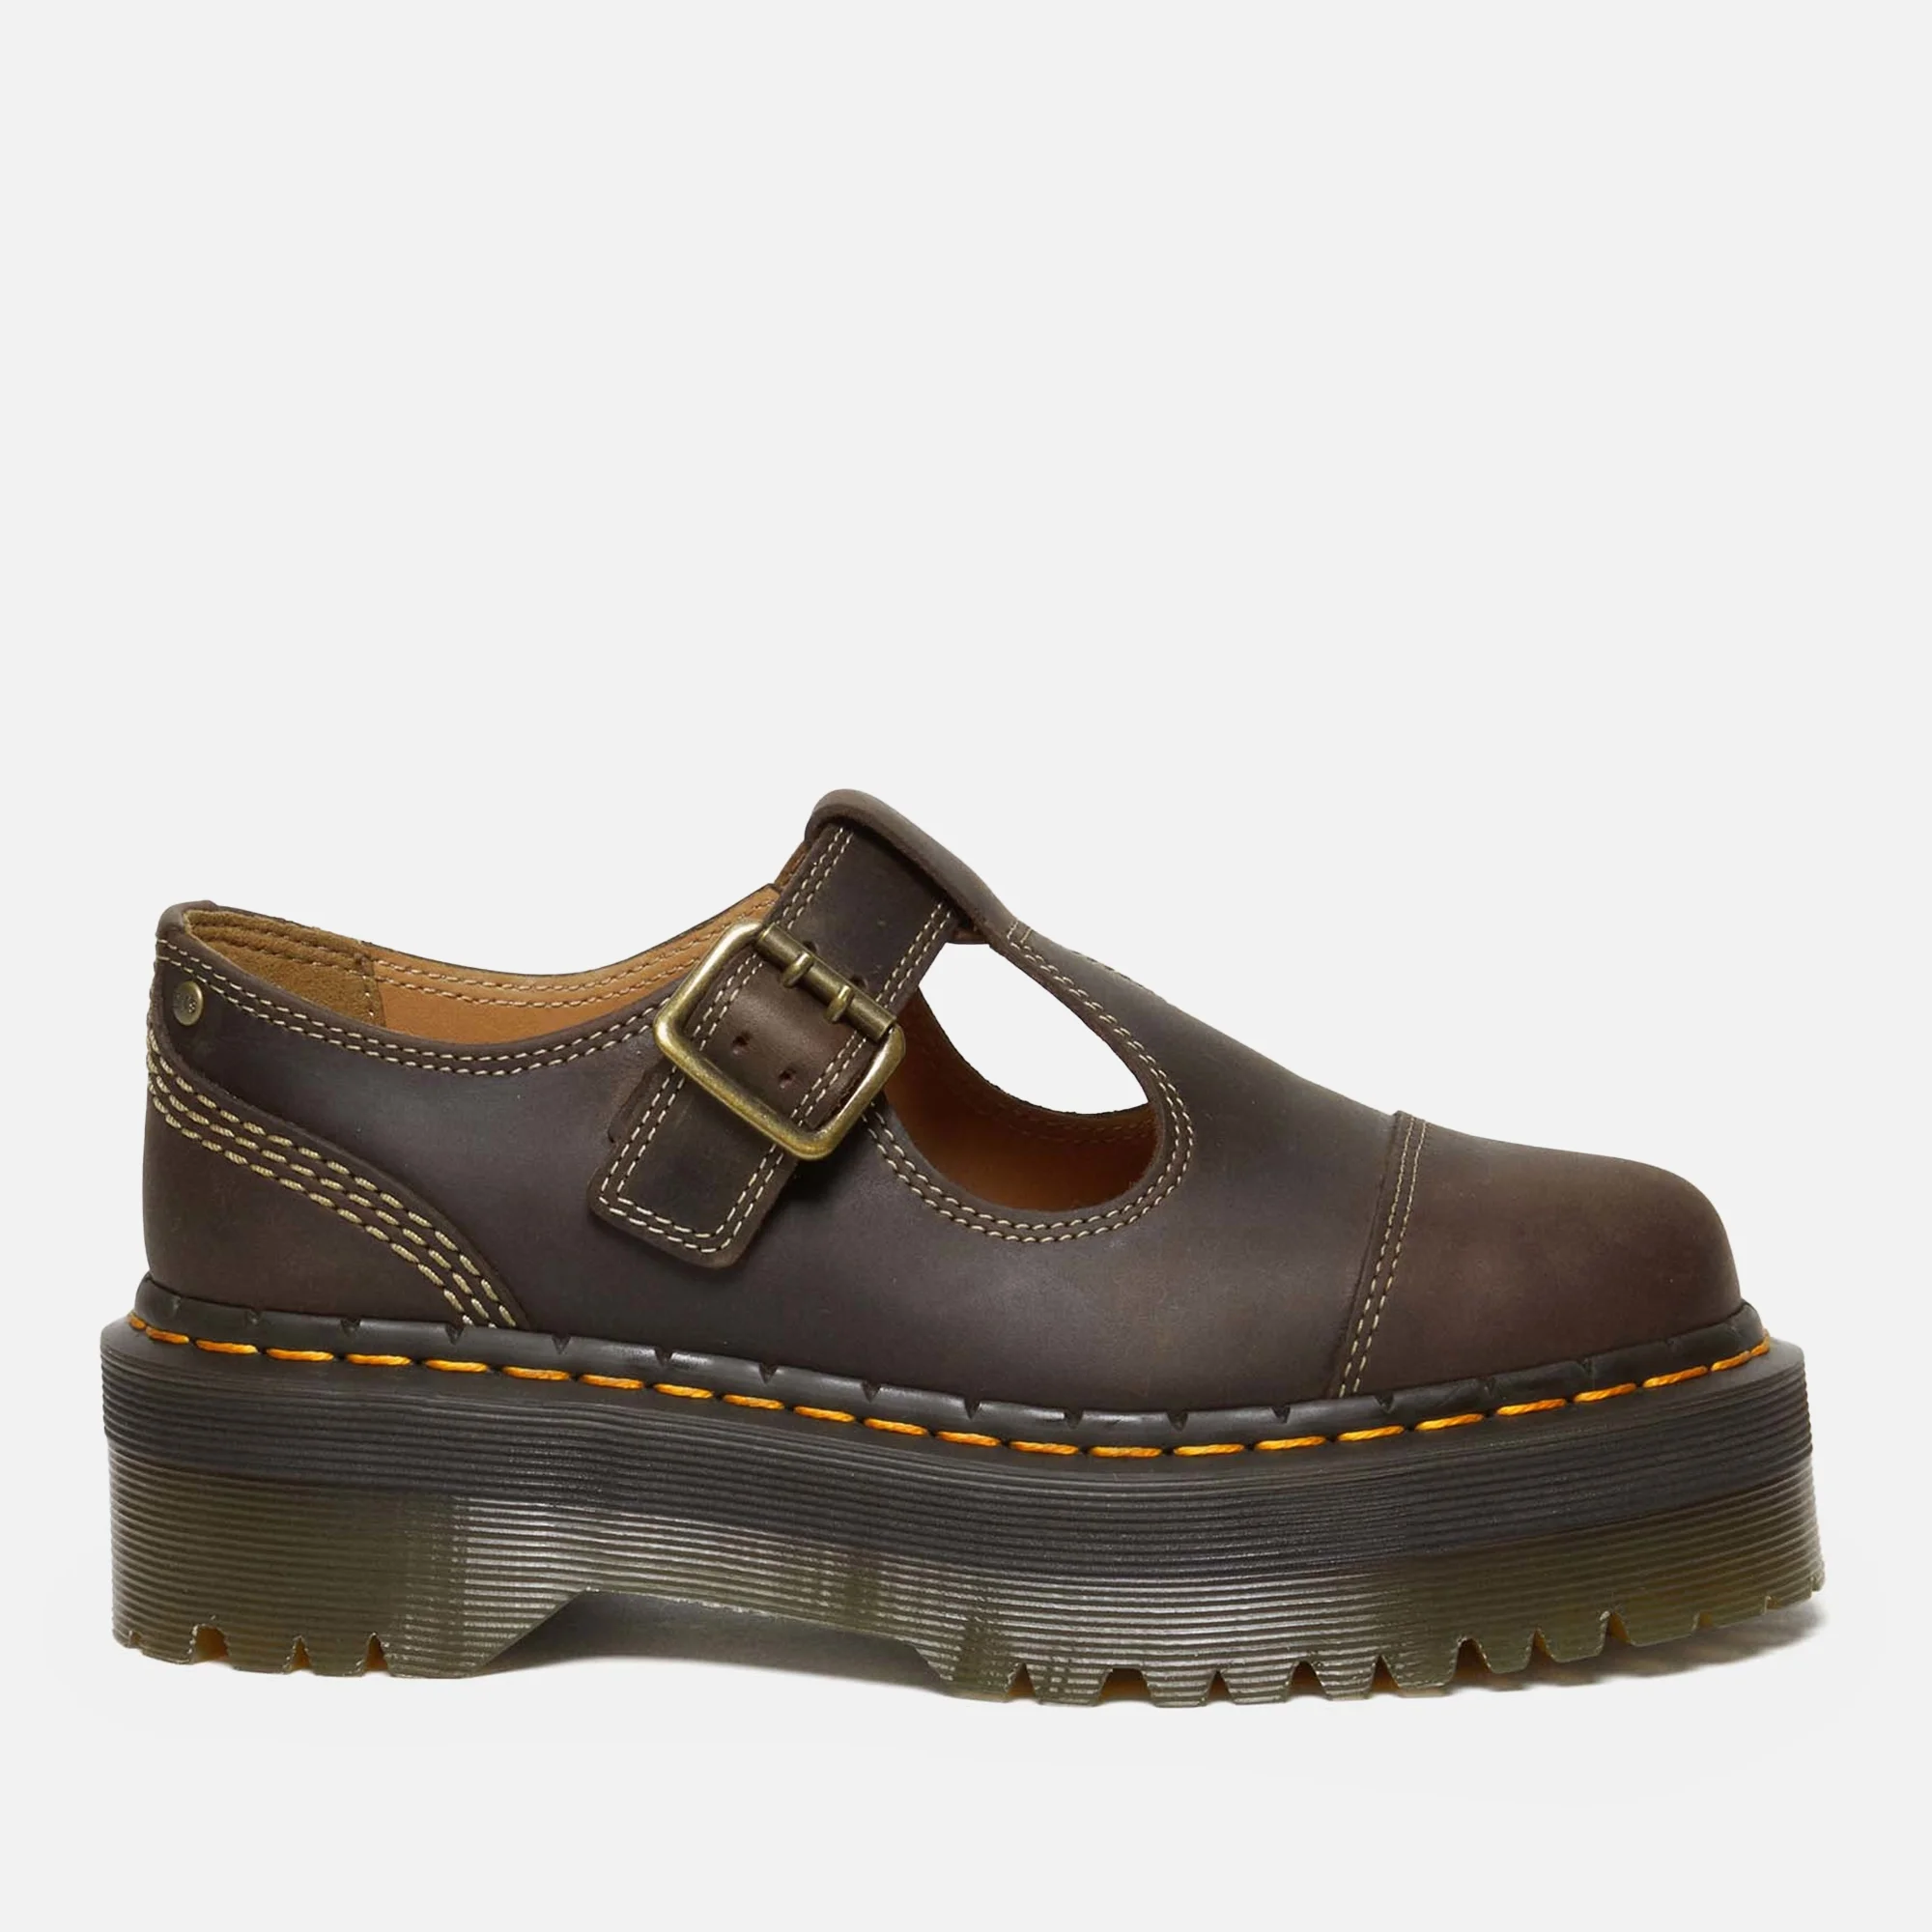 Dr. Martens Bethan Leather Quad Mary-Jane Shoes Image 1